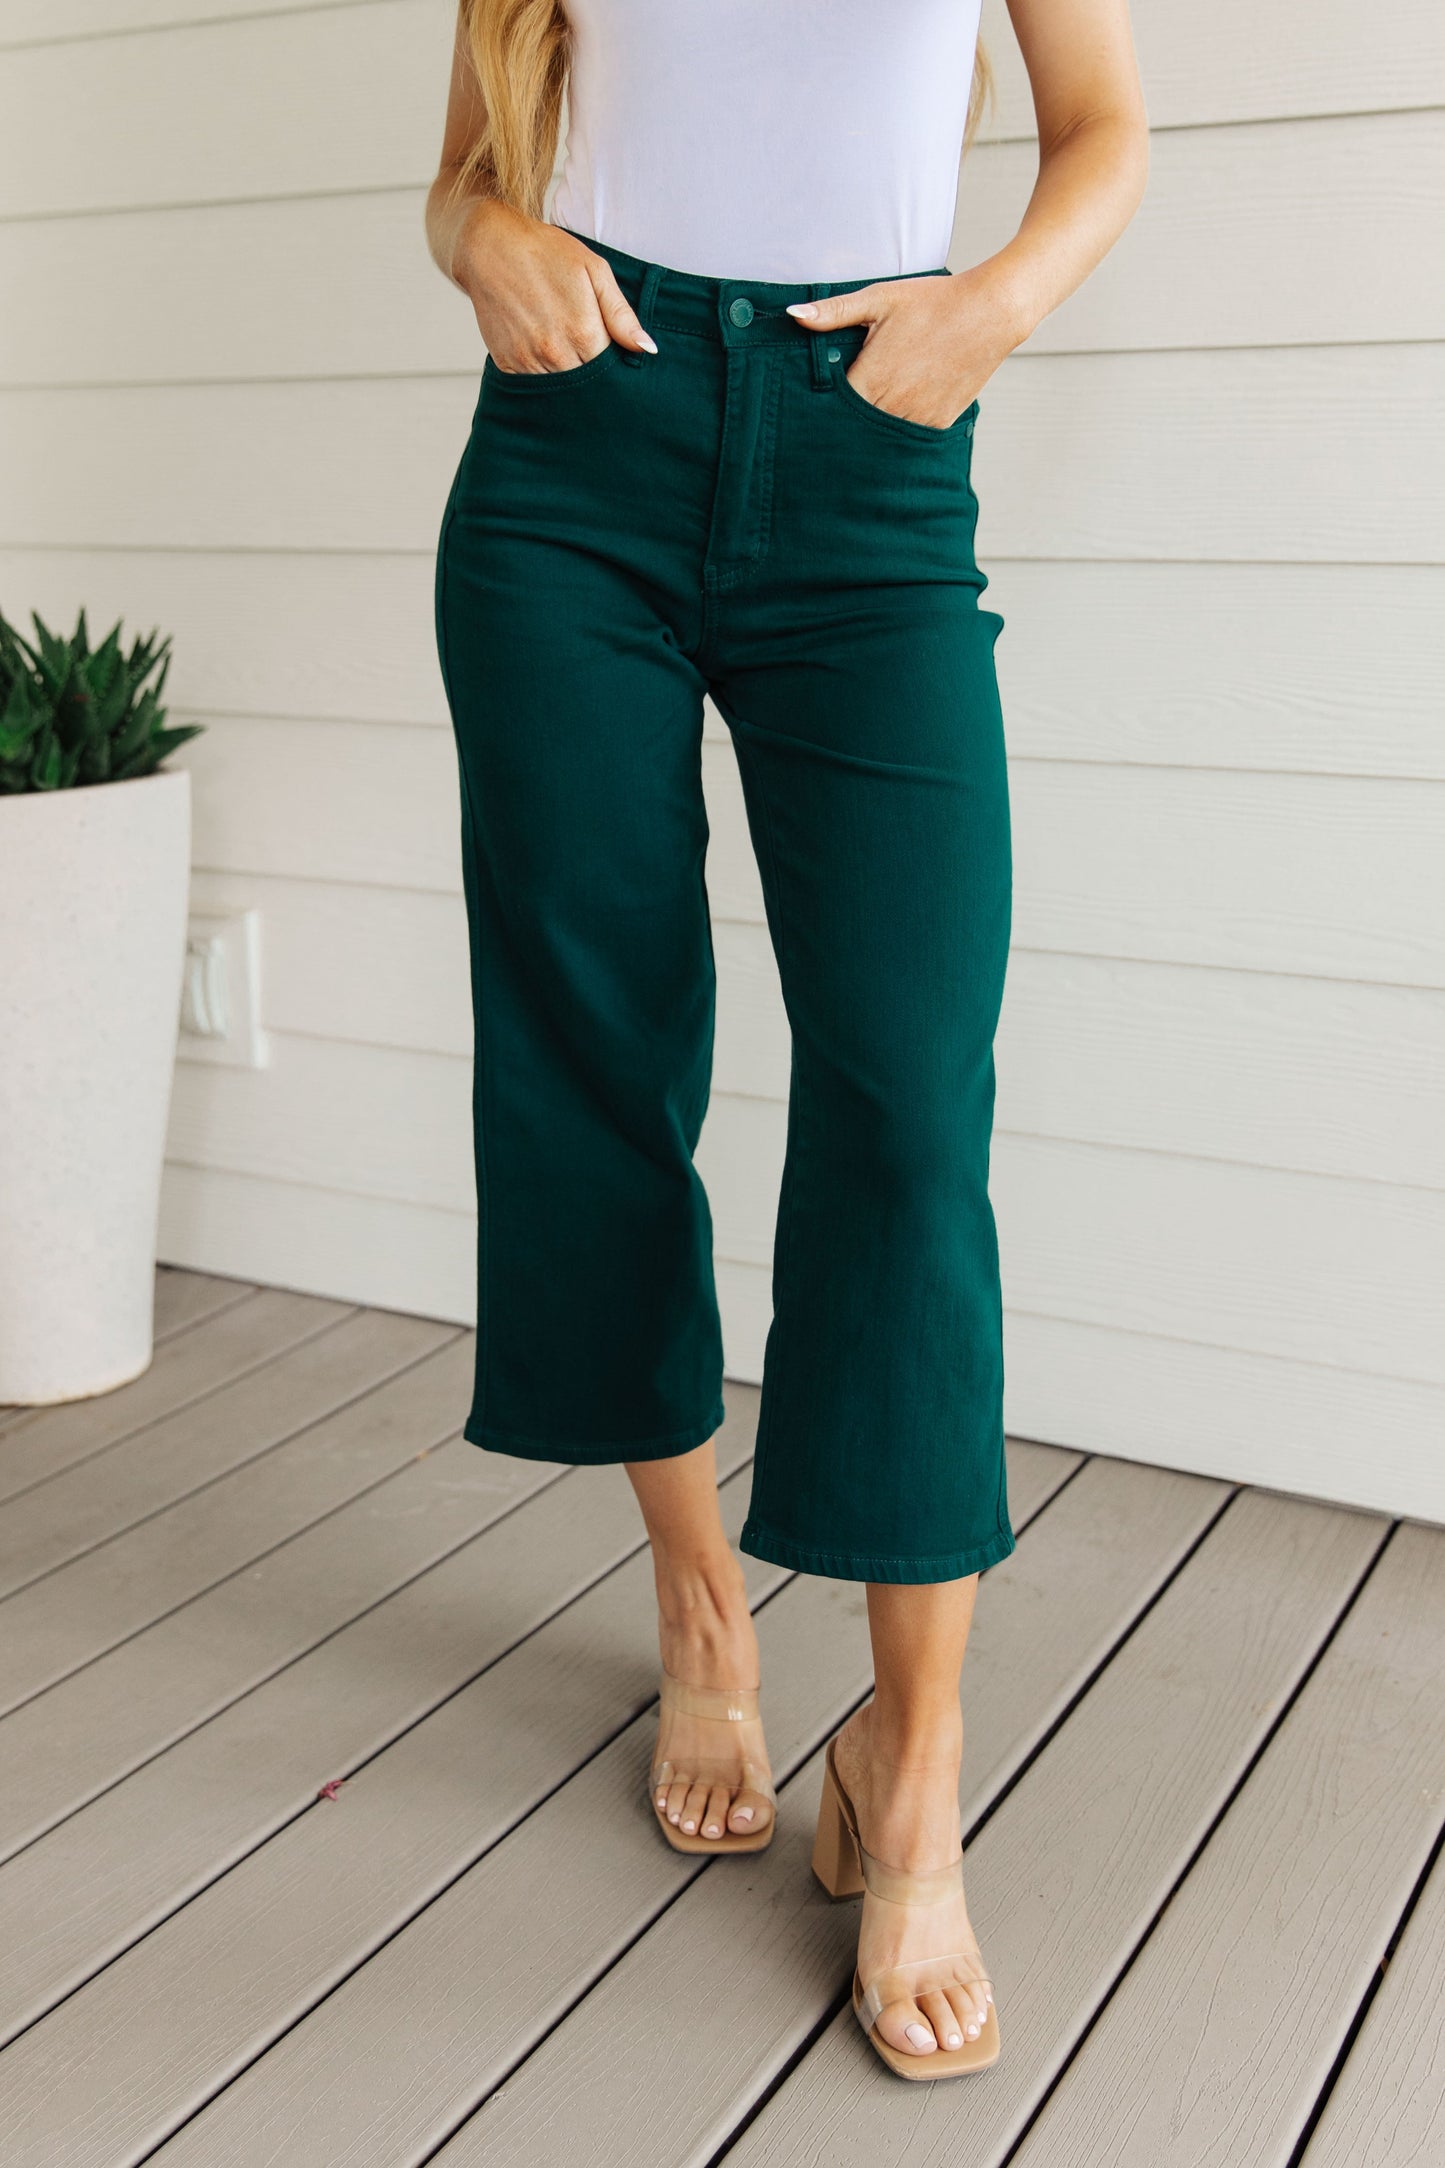 Judy Blue High Rise Control Top Wide Leg Crop Jeans in Teal